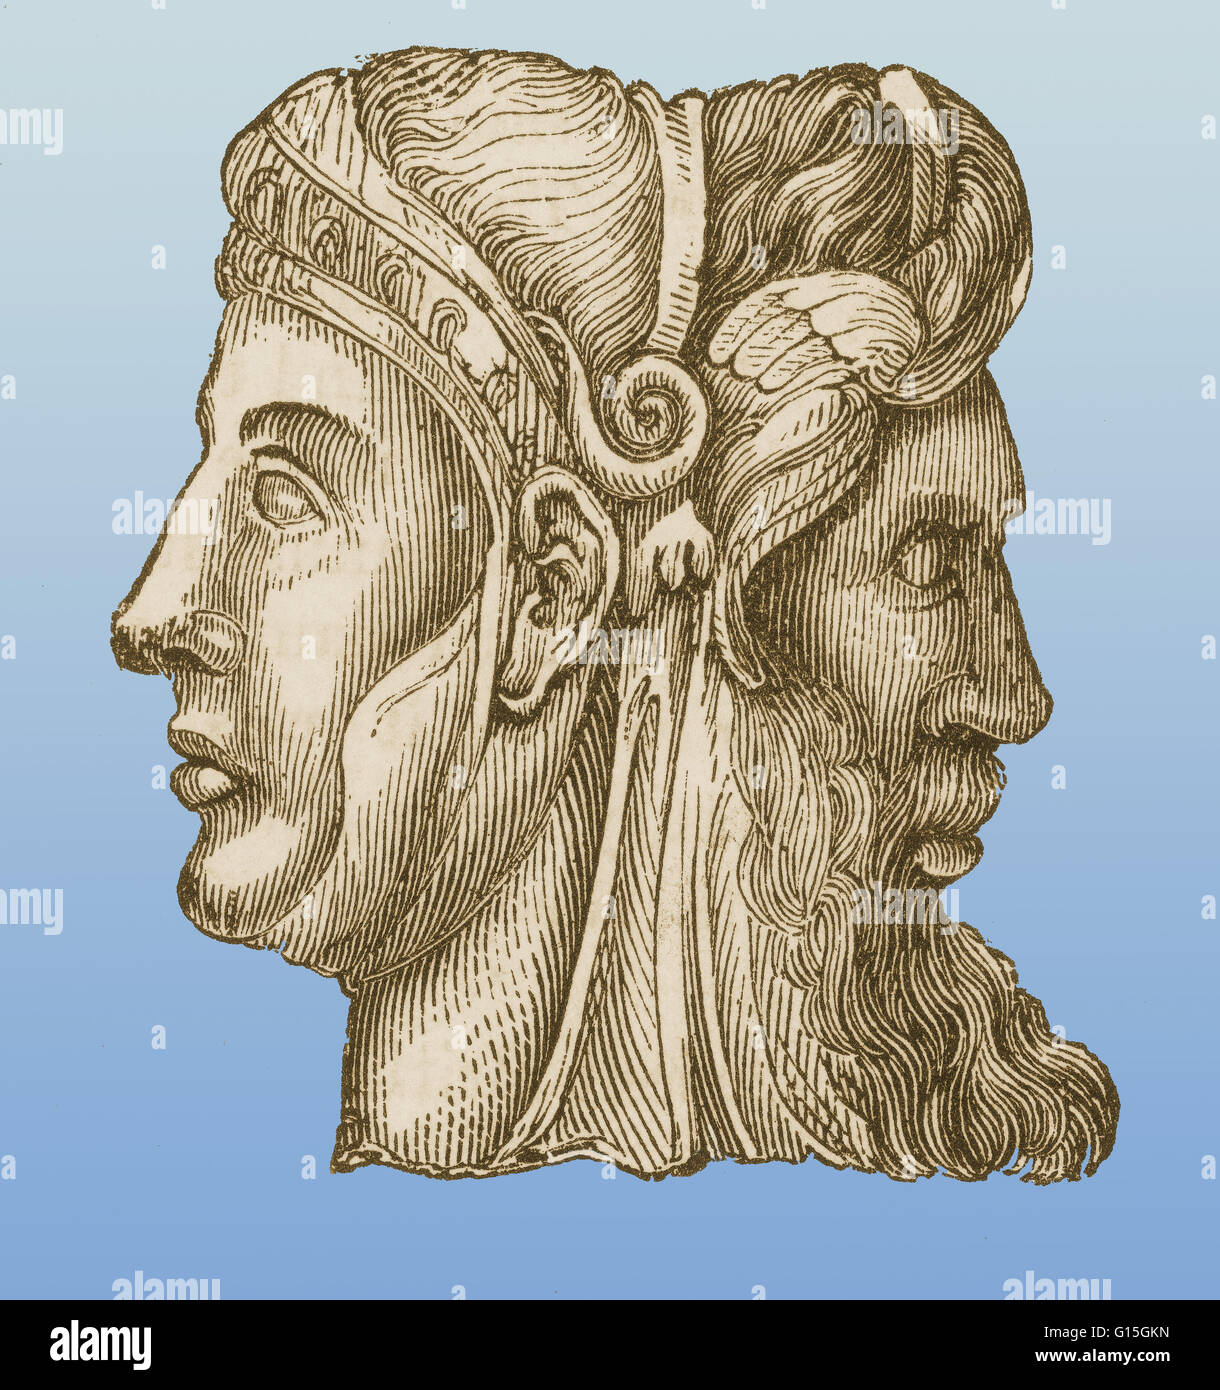 Janus, the ancient Roman god of beginnings and transitions (gates, doors, doorways, endings and time). He is usually shown as having two heads facing in opposite directions. Stock Photo